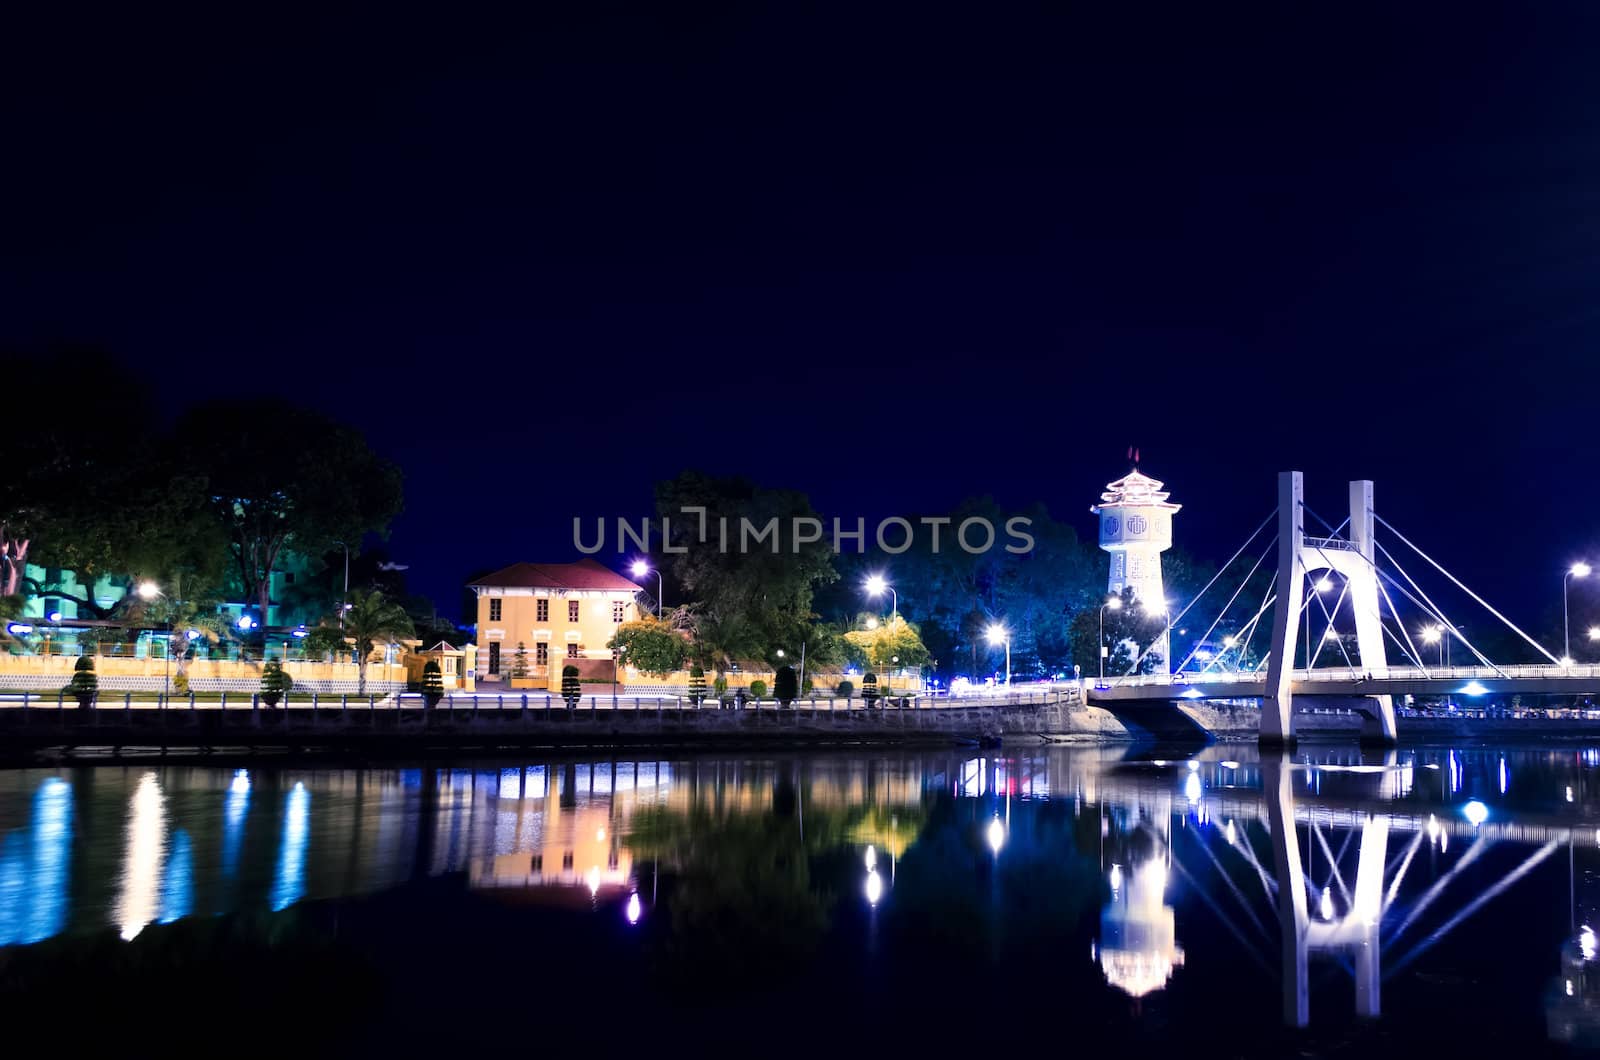 Phan Thiet Water Tower on Ca Ty River at Evening. Water Tower - Symbol of Phan Thiet.